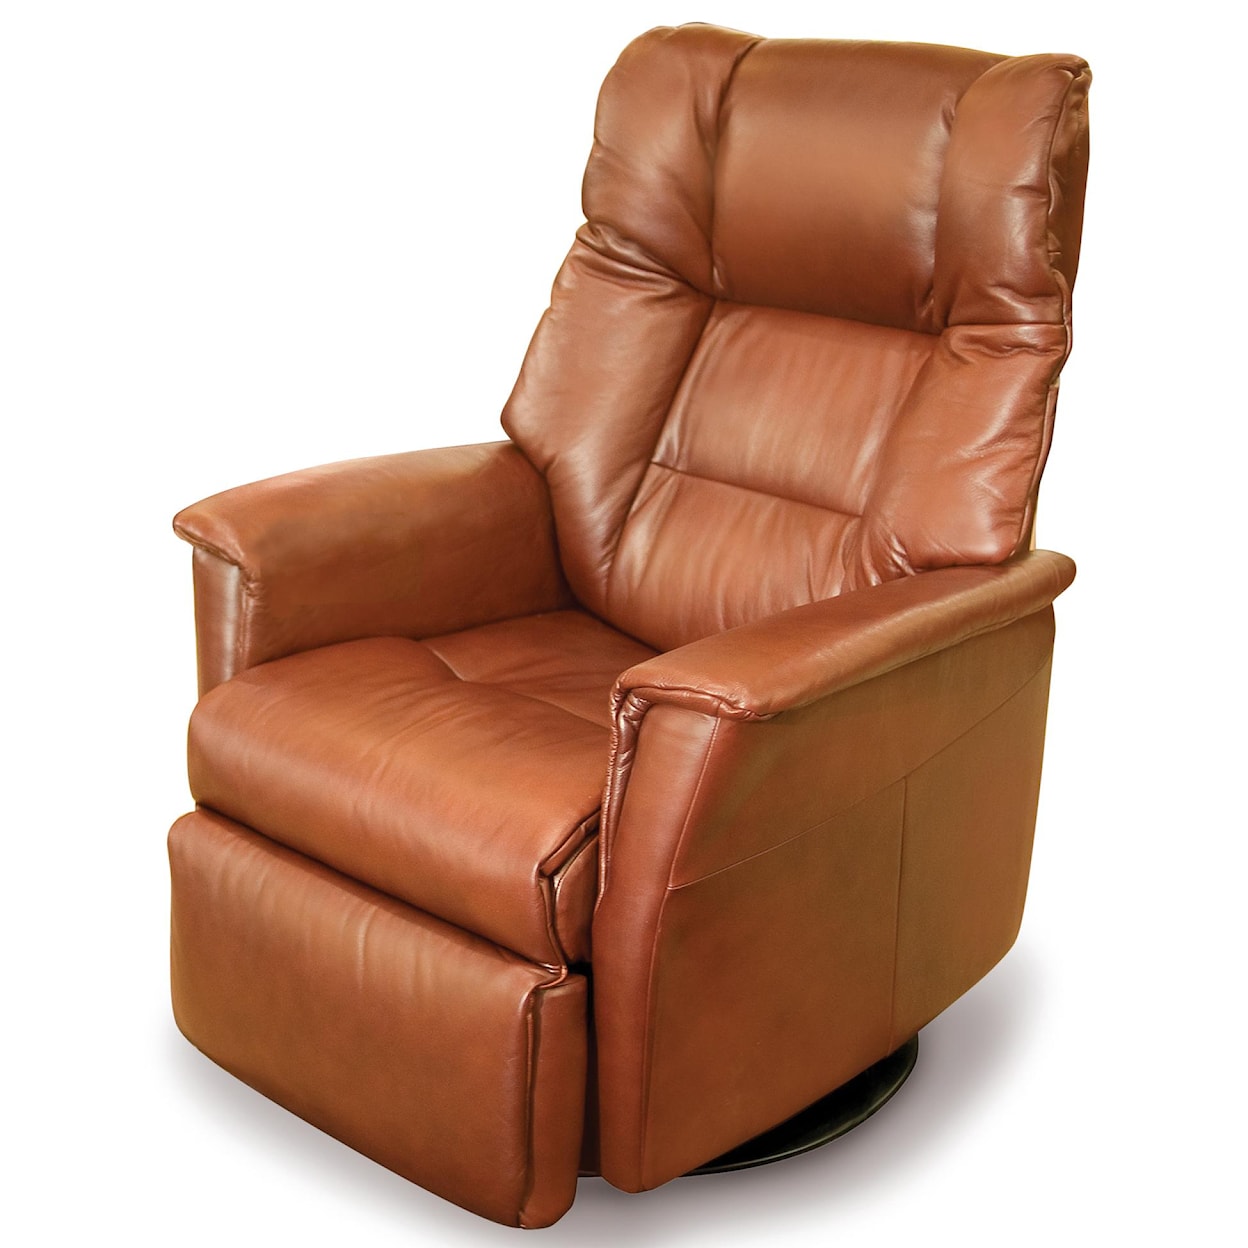 IMG Norway Recliners Recliner Relaxer